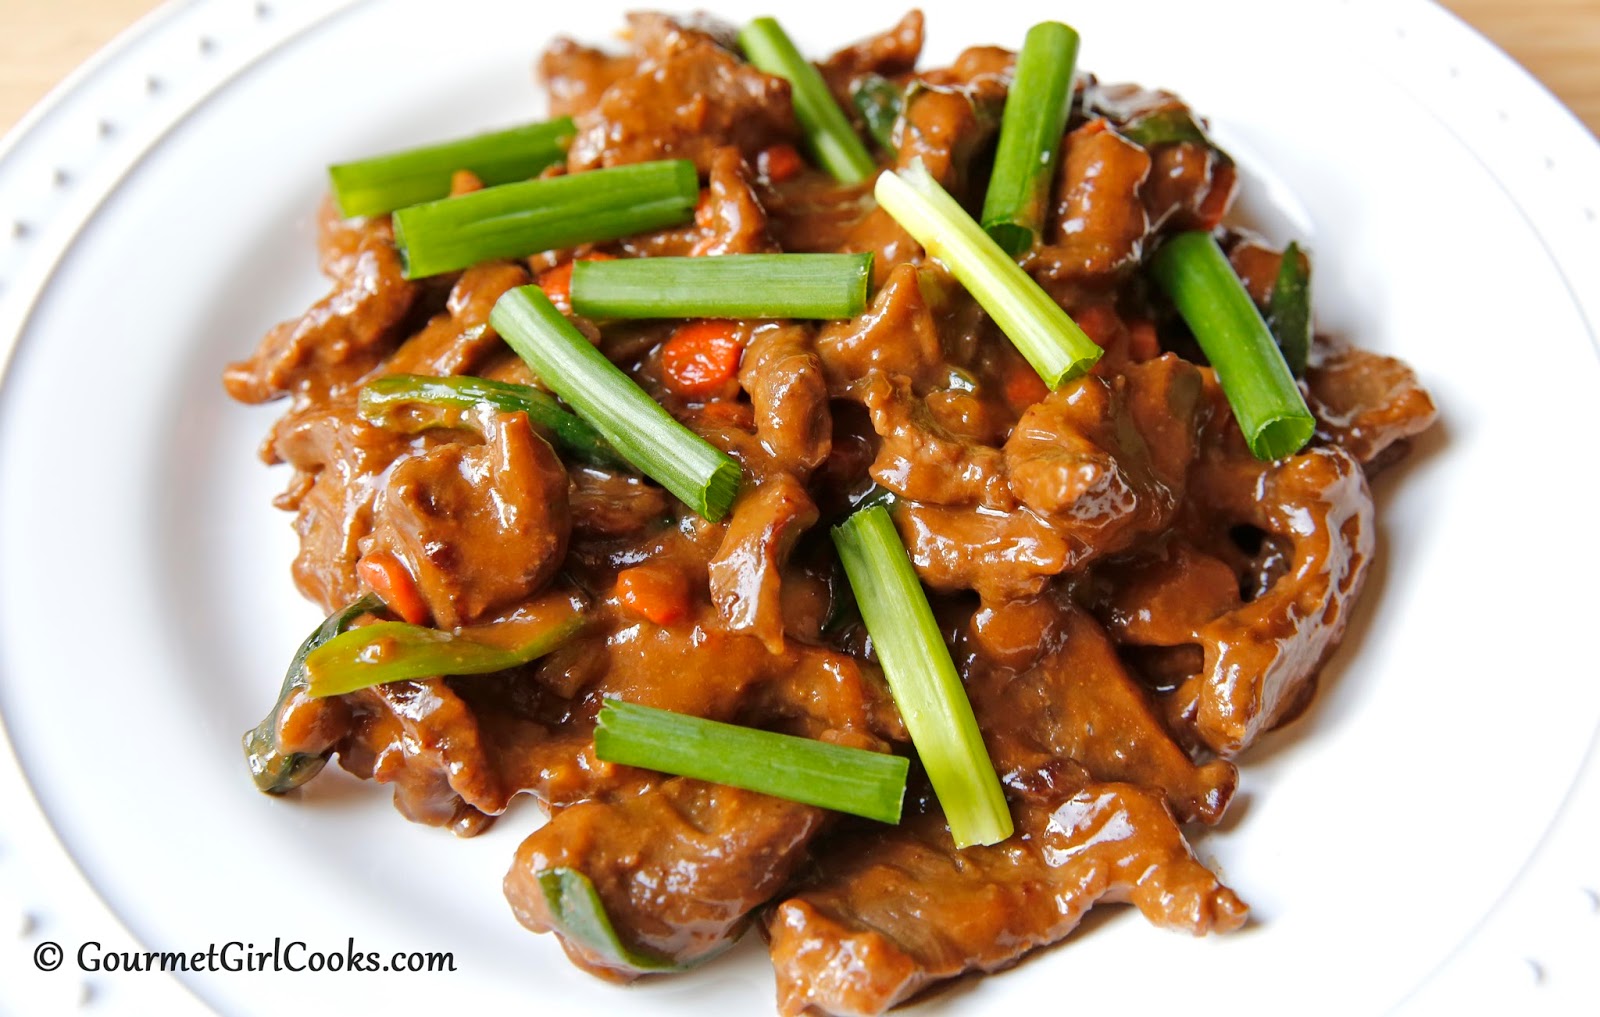 Gourmet Girl Cooks: Mongolian Beef - Low Carb